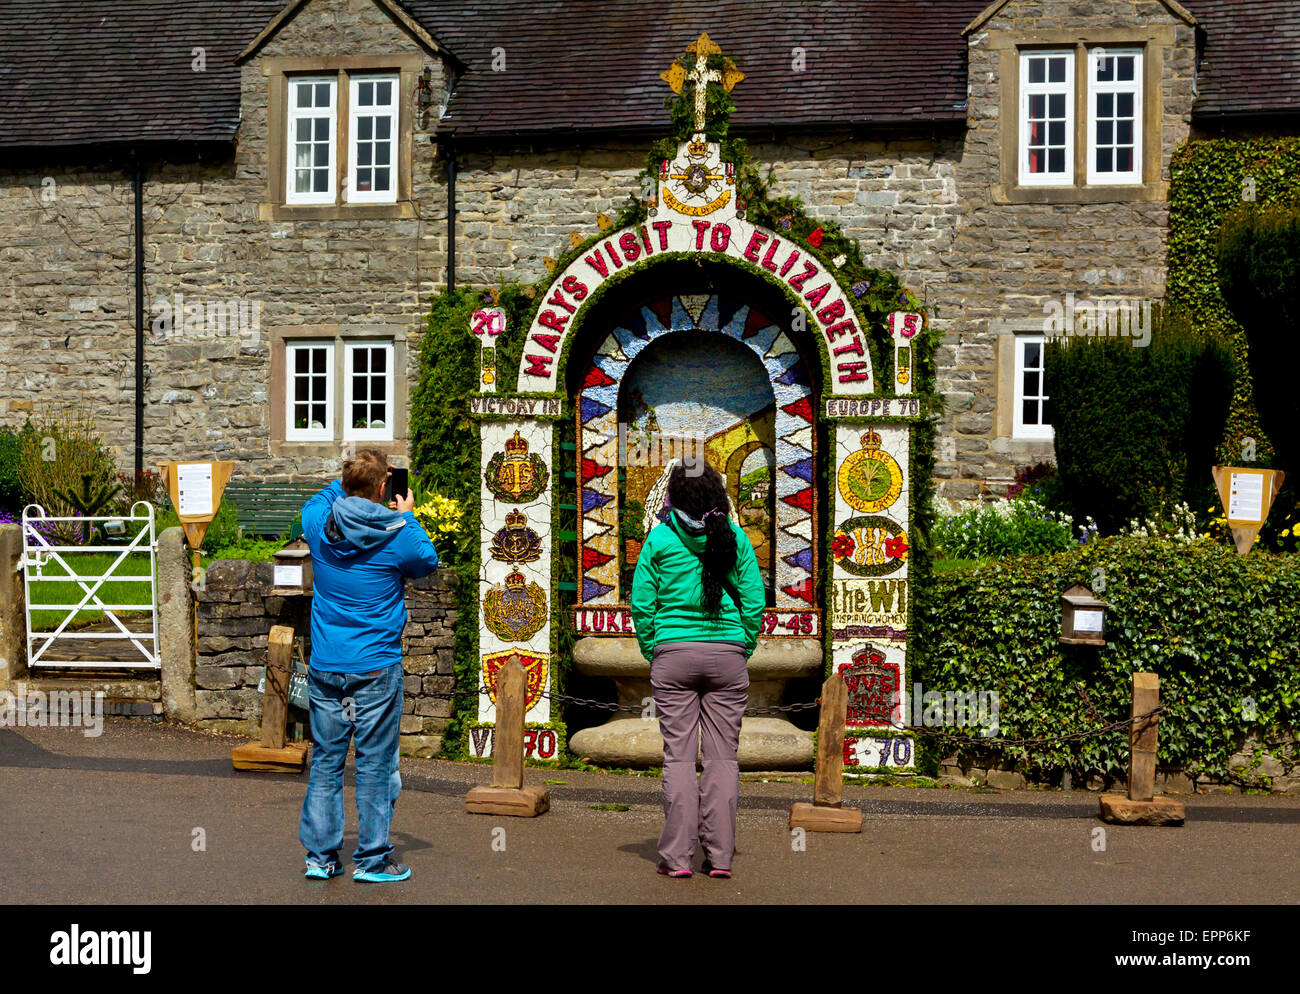 Tourists admiring a traditional Well Dressing in Tissington village an annual event in the Derbyshire Peak District England UK Stock Photo